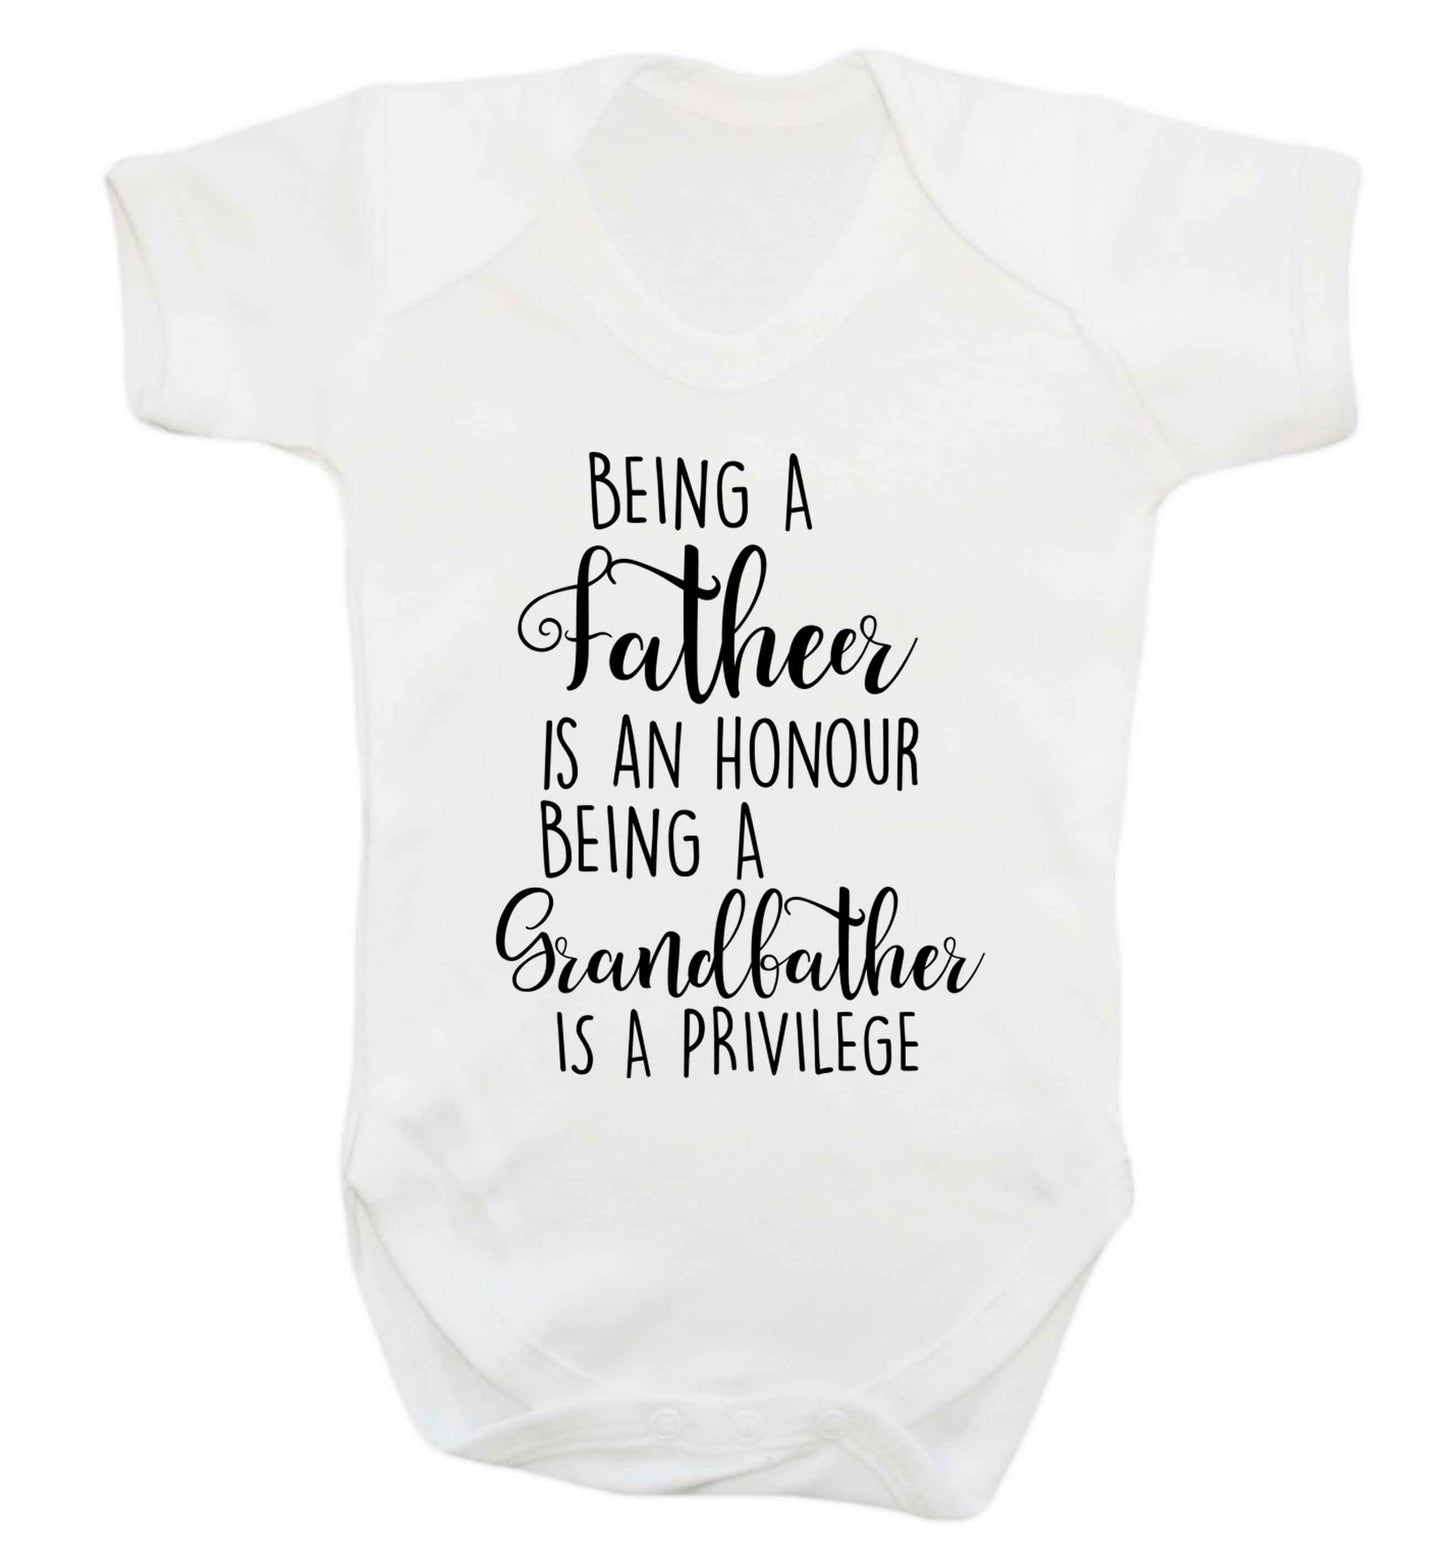 Being a father is an honour being a grandfather is a privilege Baby Vest white 18-24 months